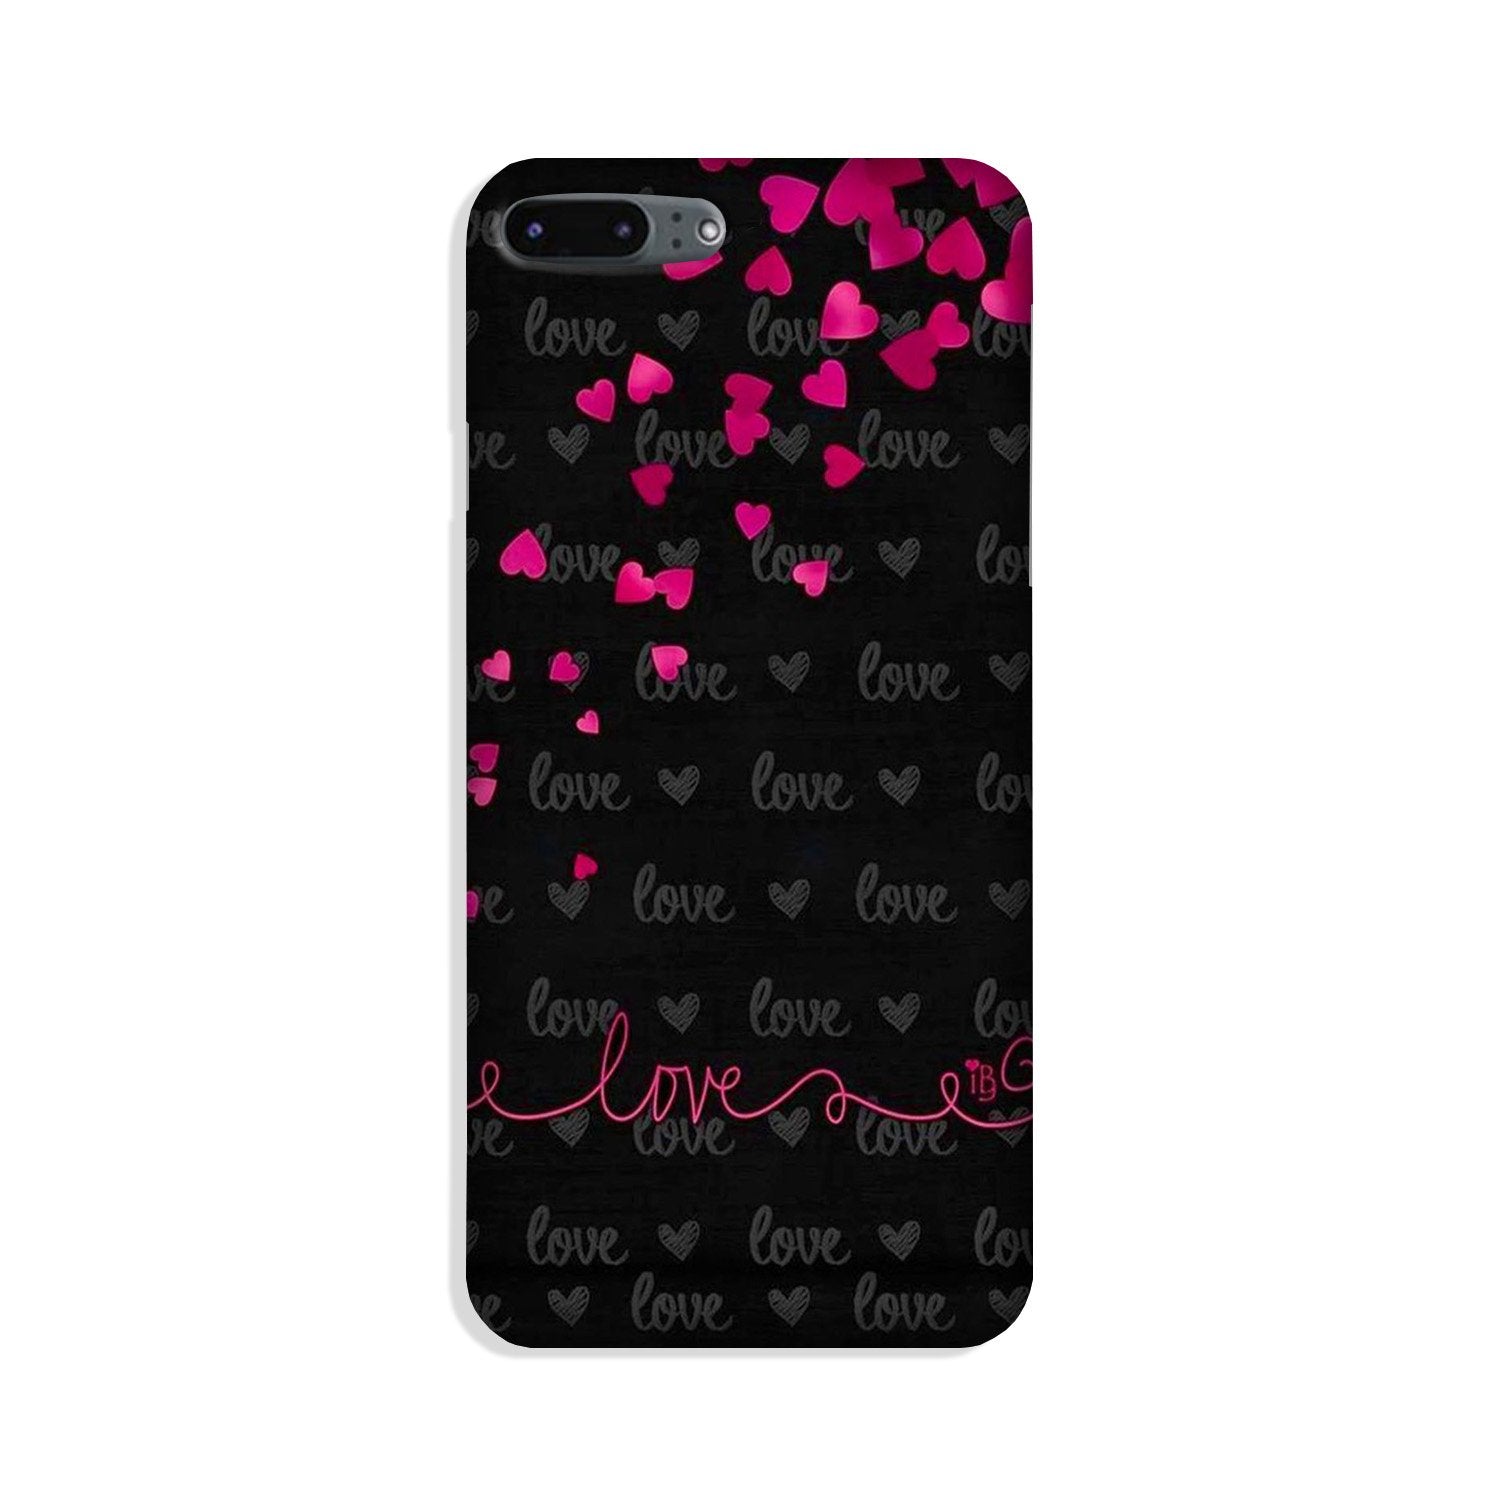 Love in Air Case for iPhone 8 Plus